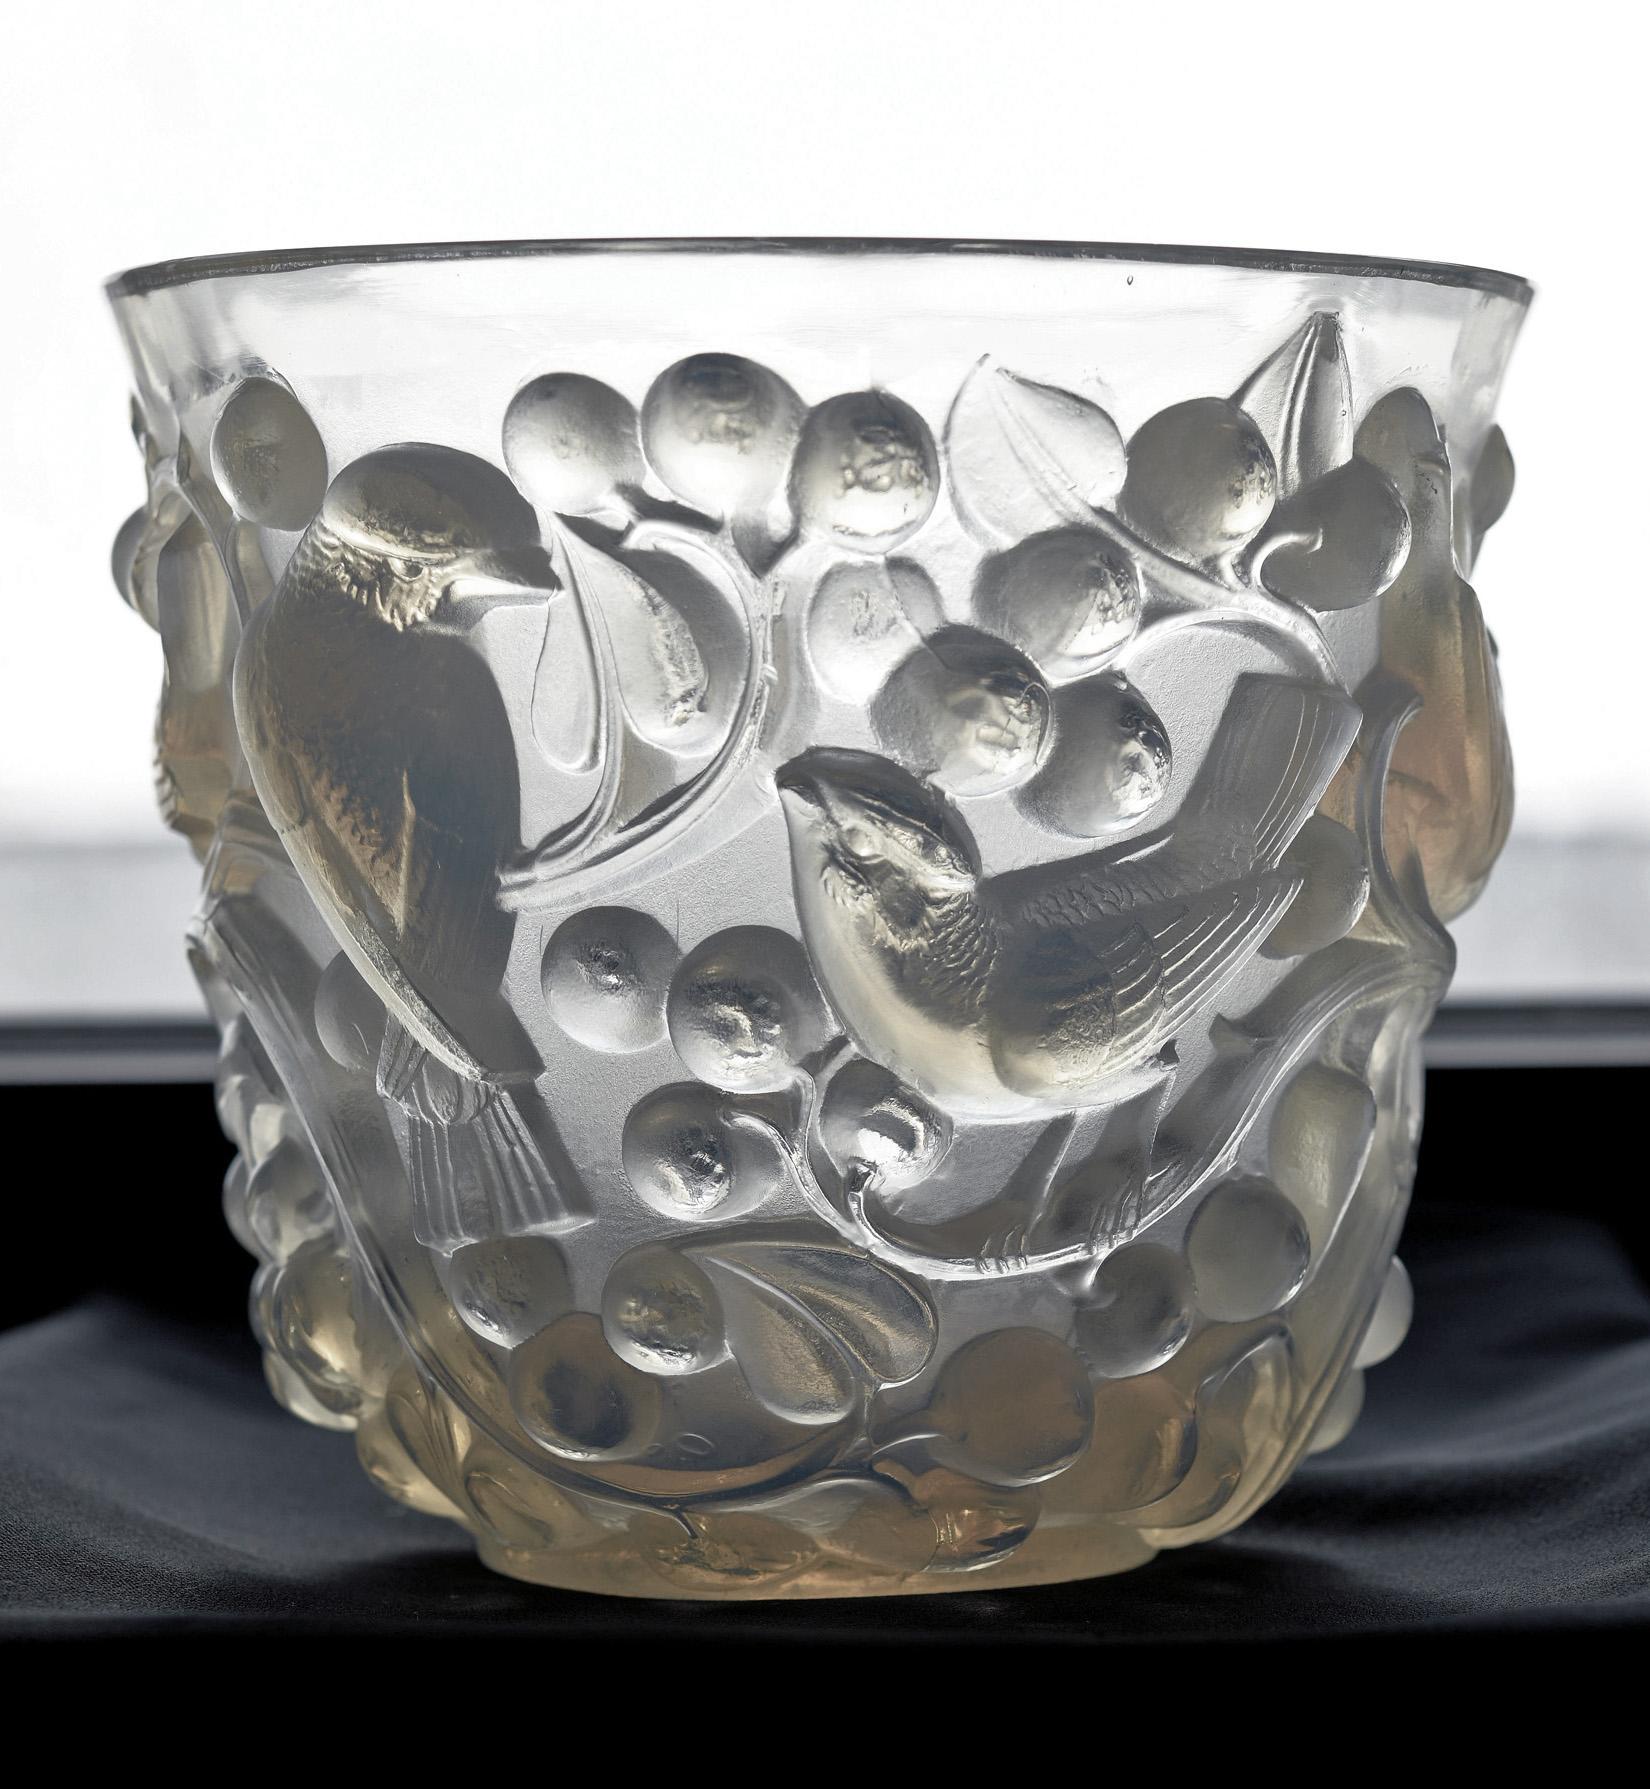 René Lalique Avallon vase, circa 1930. The vase with relief birds in foliage motif opalescent glass, signed R. Lalique. Size: Height 5.75 inches, 14.5 cm.